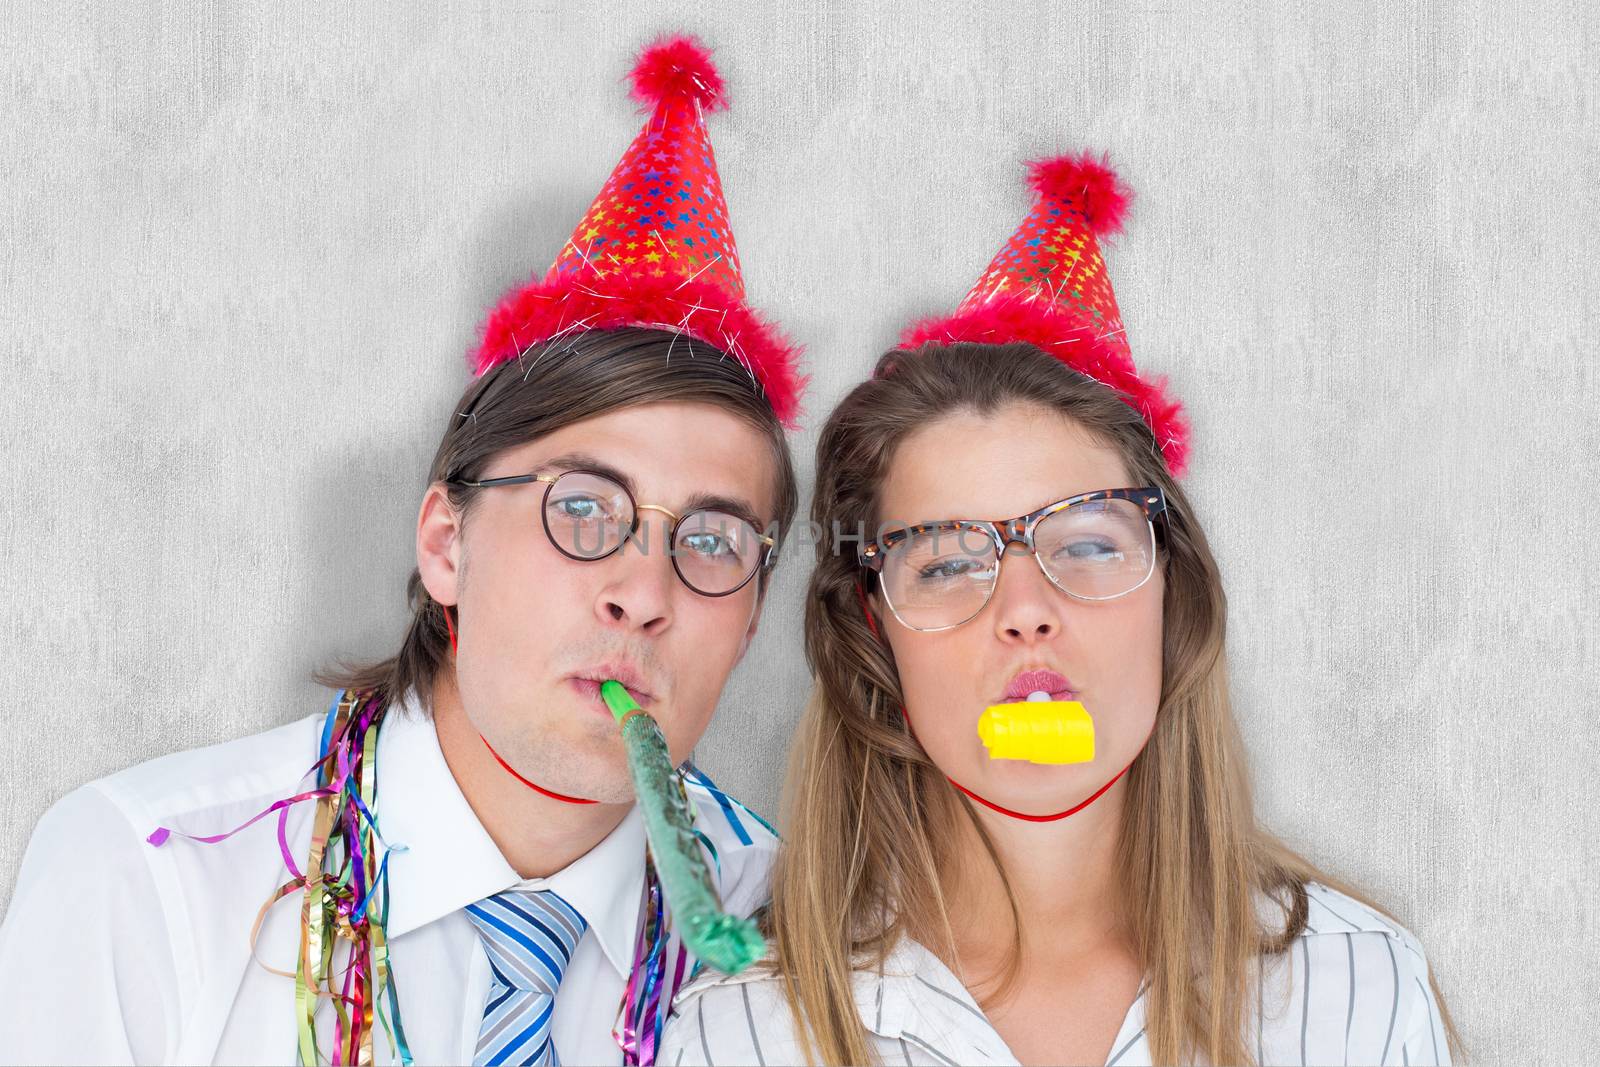 Composite image of geeky hipster wearing a party hat with blowing party horn by Wavebreakmedia